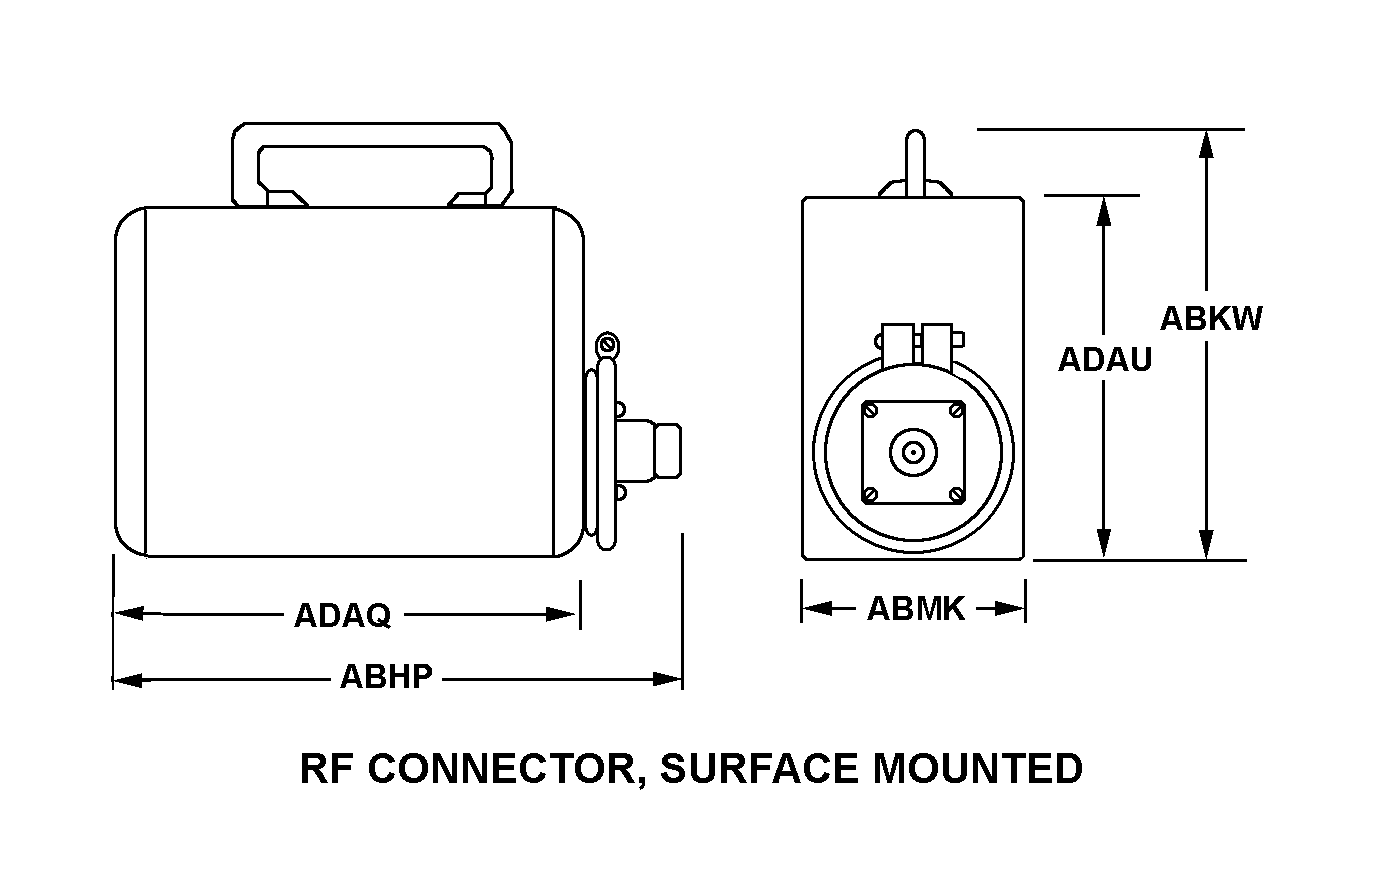 RF CONNECTOR, SURFACE MOUNTED style nsn 5985-01-332-8098